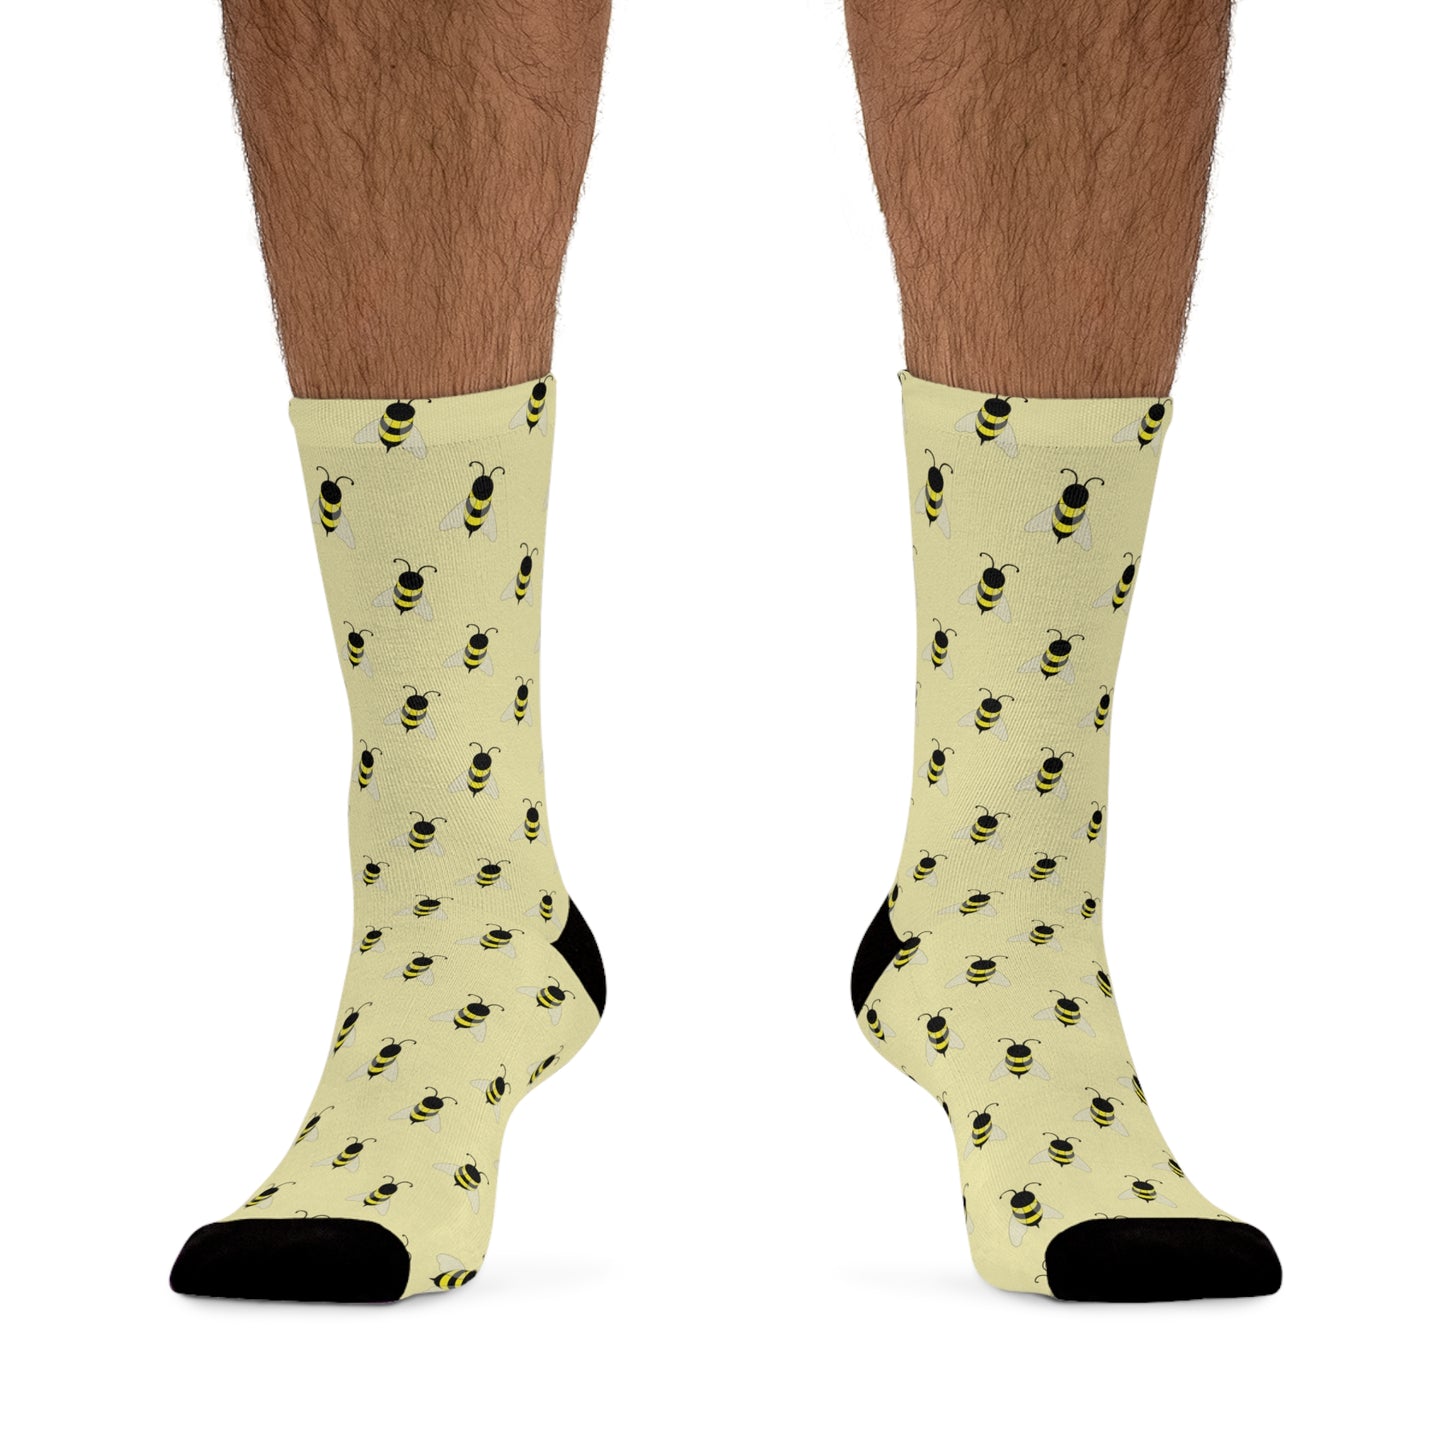 Bee Patterned Socks: The Recycled Poly Eco-Friendly and Stylish Socks for Nature Lovers